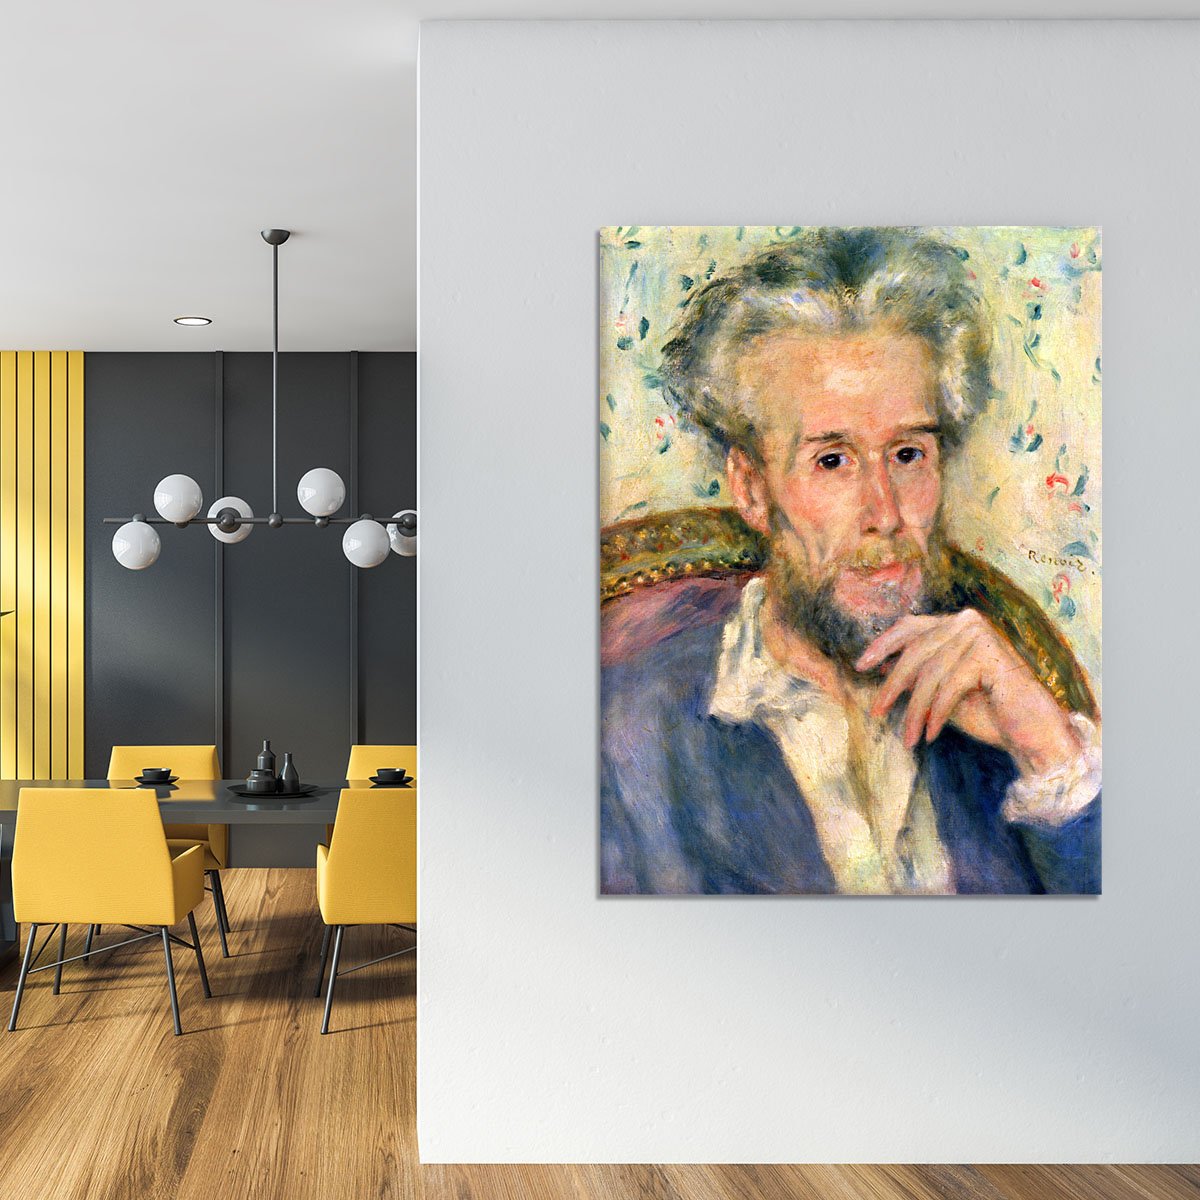 Portrait of a man by Renoir Canvas Print or Poster